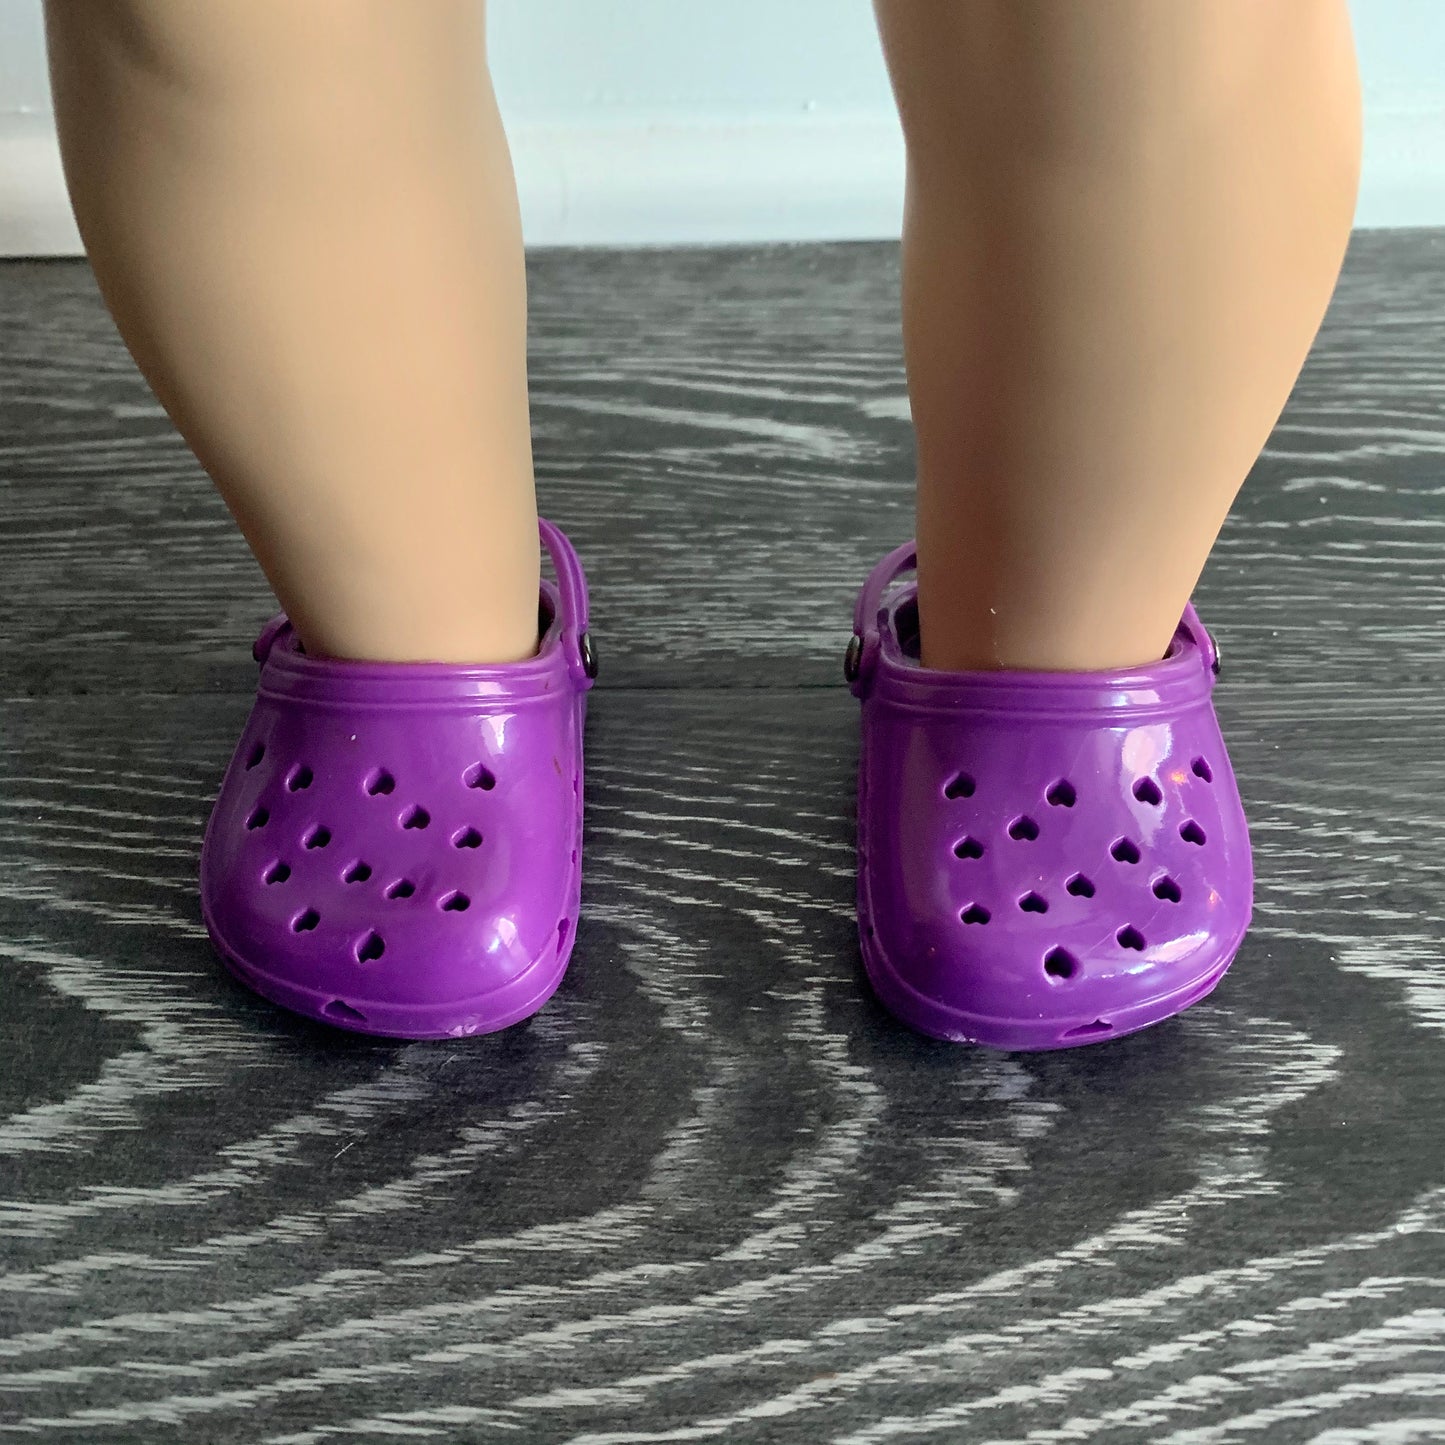 Doll Crocs (other colors available)